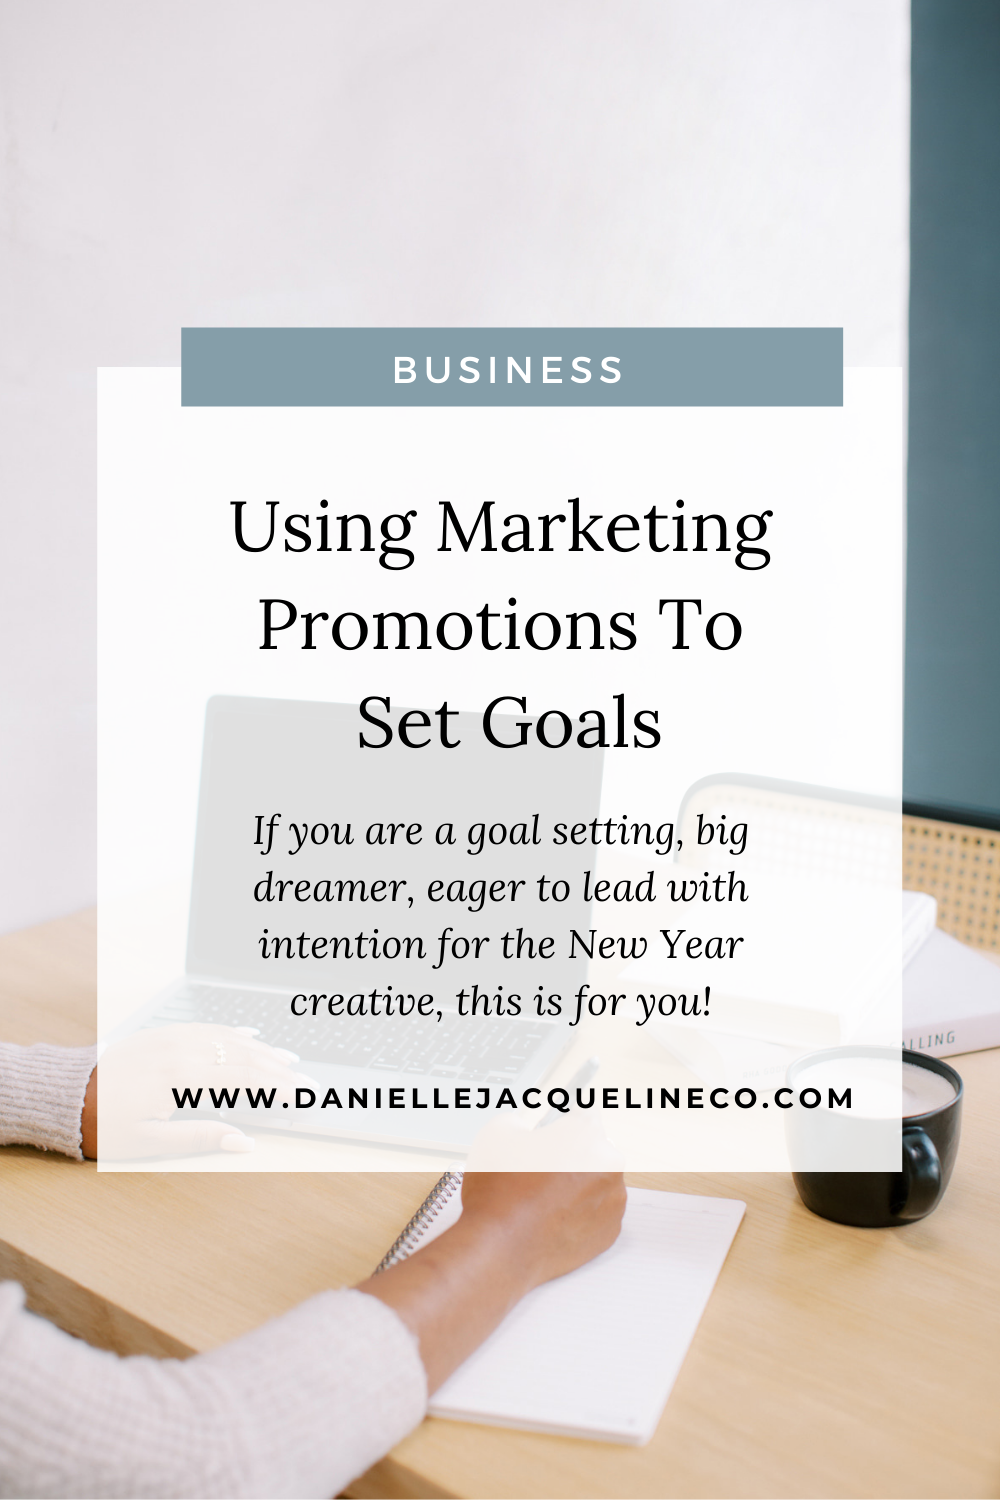 Using Marketing Promotions To Set Goals